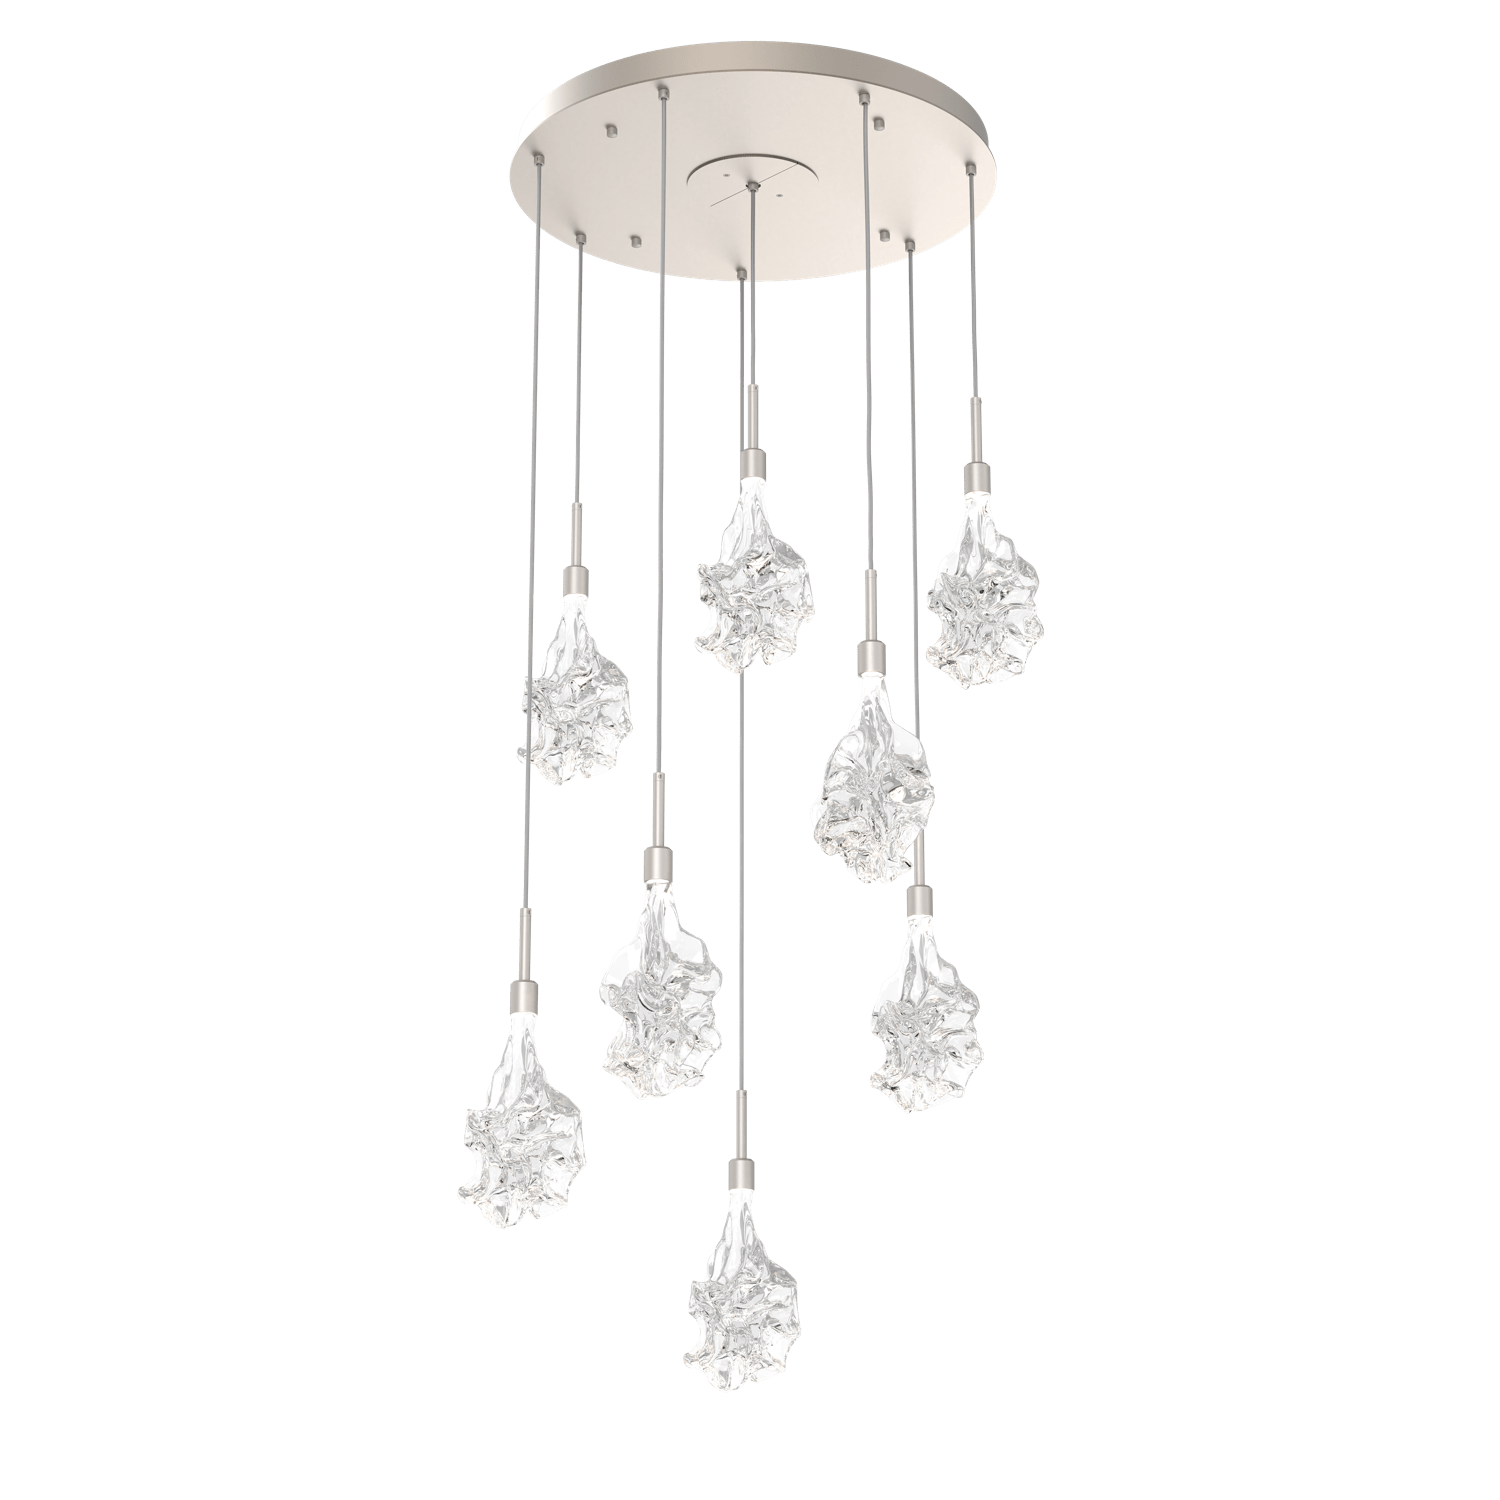 CHB0059-08-BS-Hammerton-Studio-Blossom-8-light-round-pendant-chandelier-with-metallic-beige-silver-finish-and-clear-handblown-crystal-glass-shades-and-LED-lamping